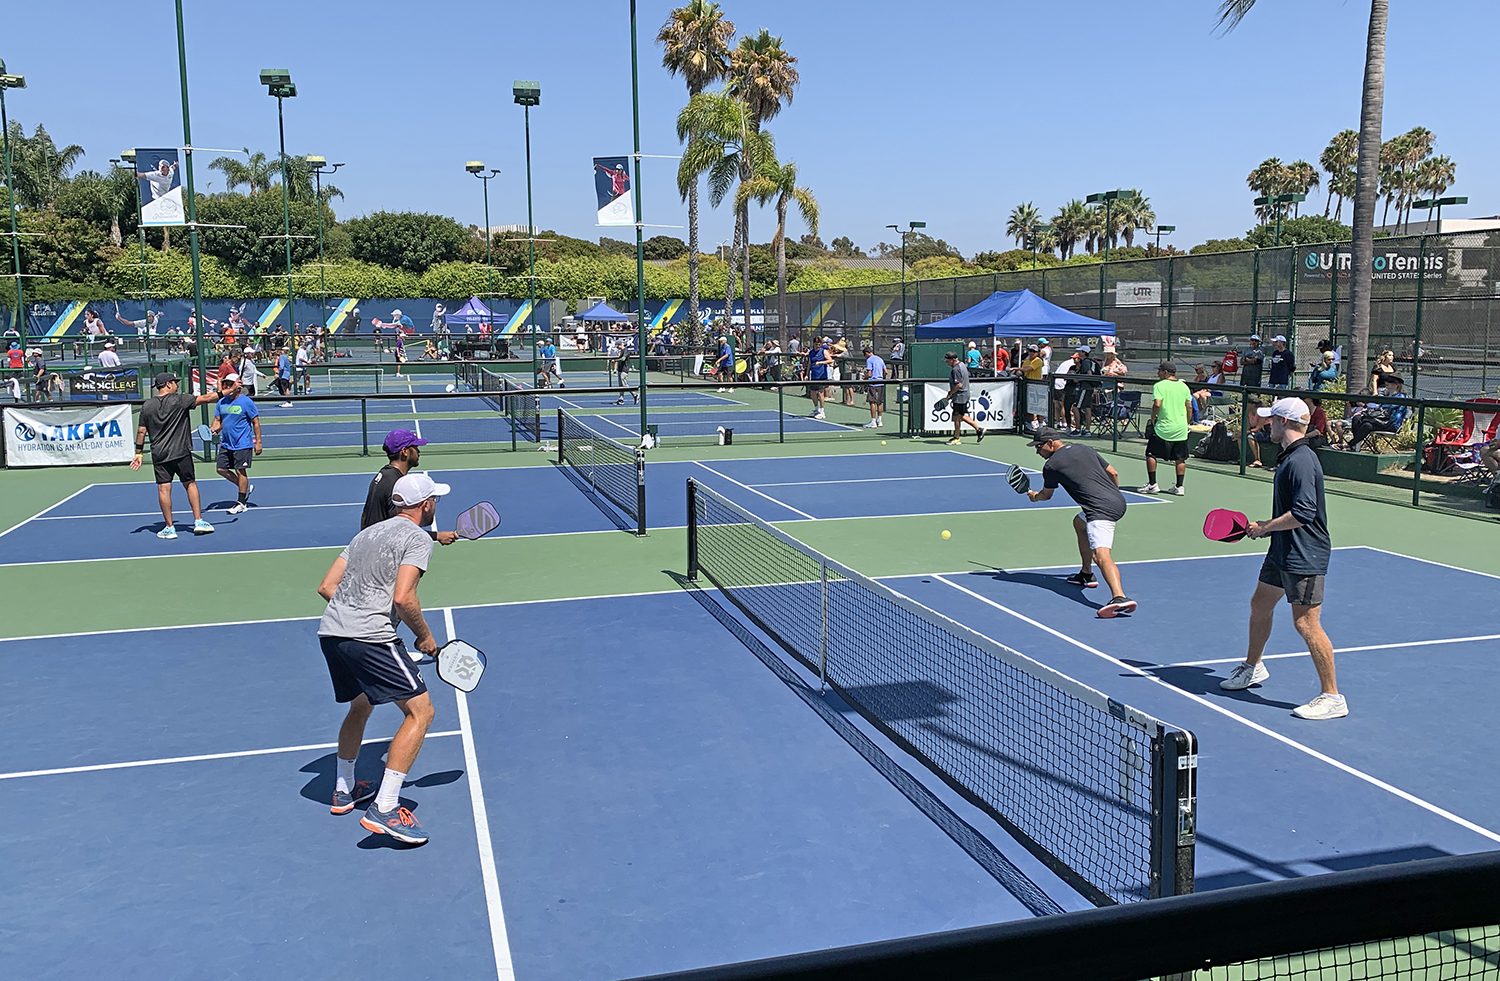 Play for Gray Charity Pickleball Tournament at Tennis & Pickleball Club